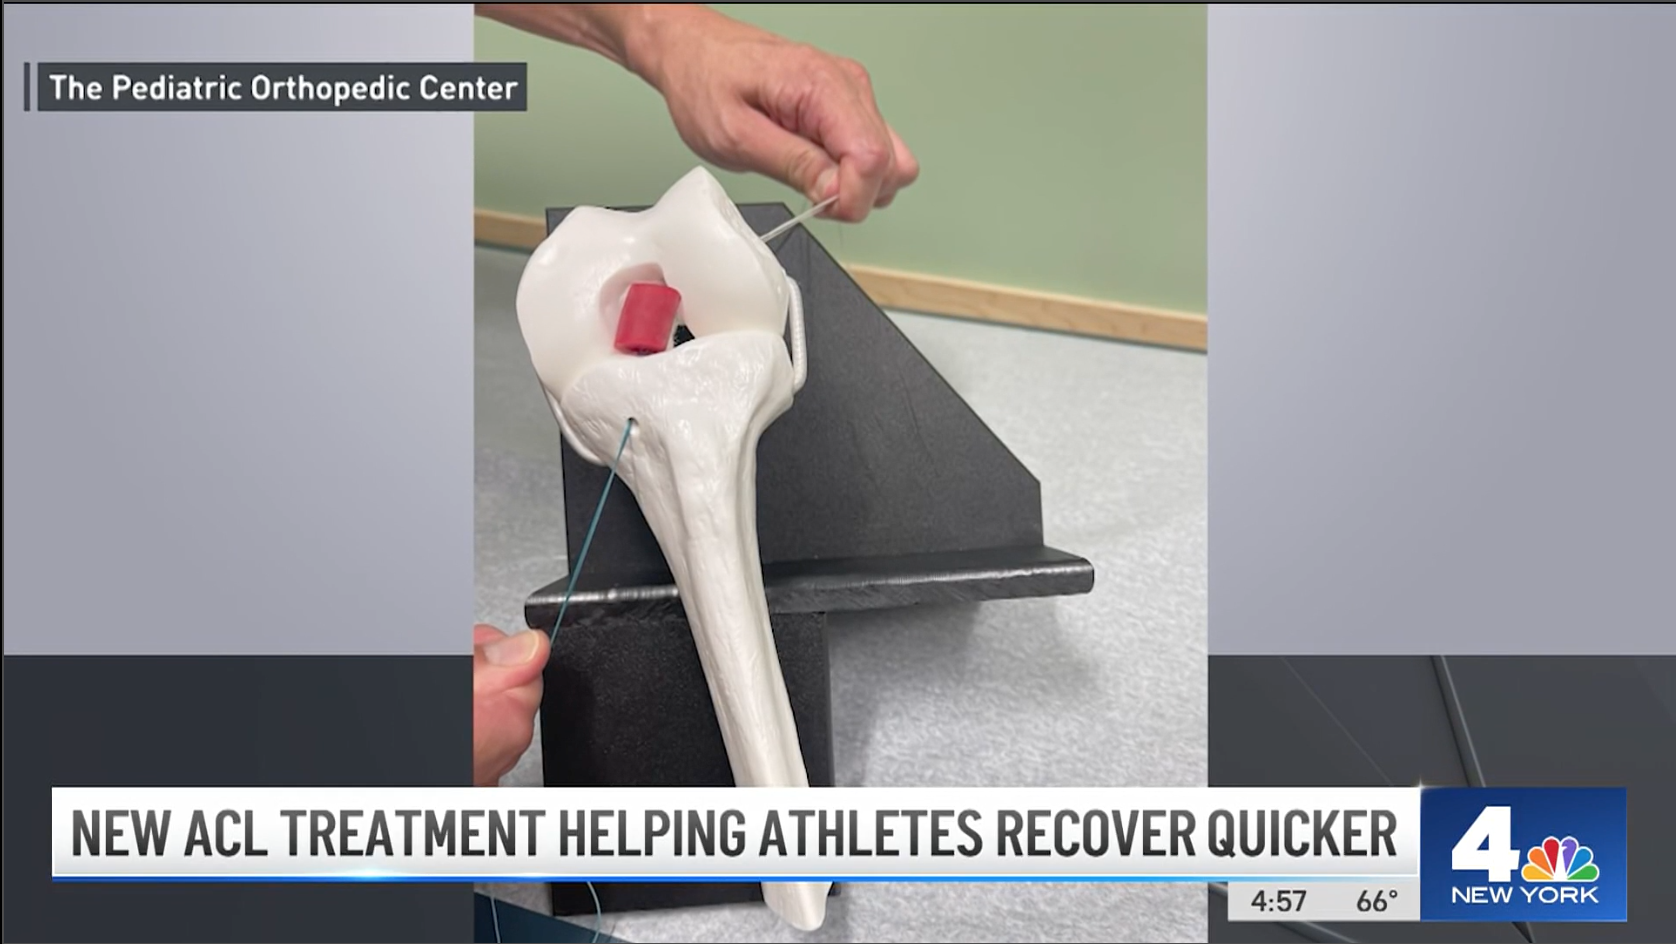 A still from the NBC New York story on New ACL Treatment Helping Athletes Recover Quicker